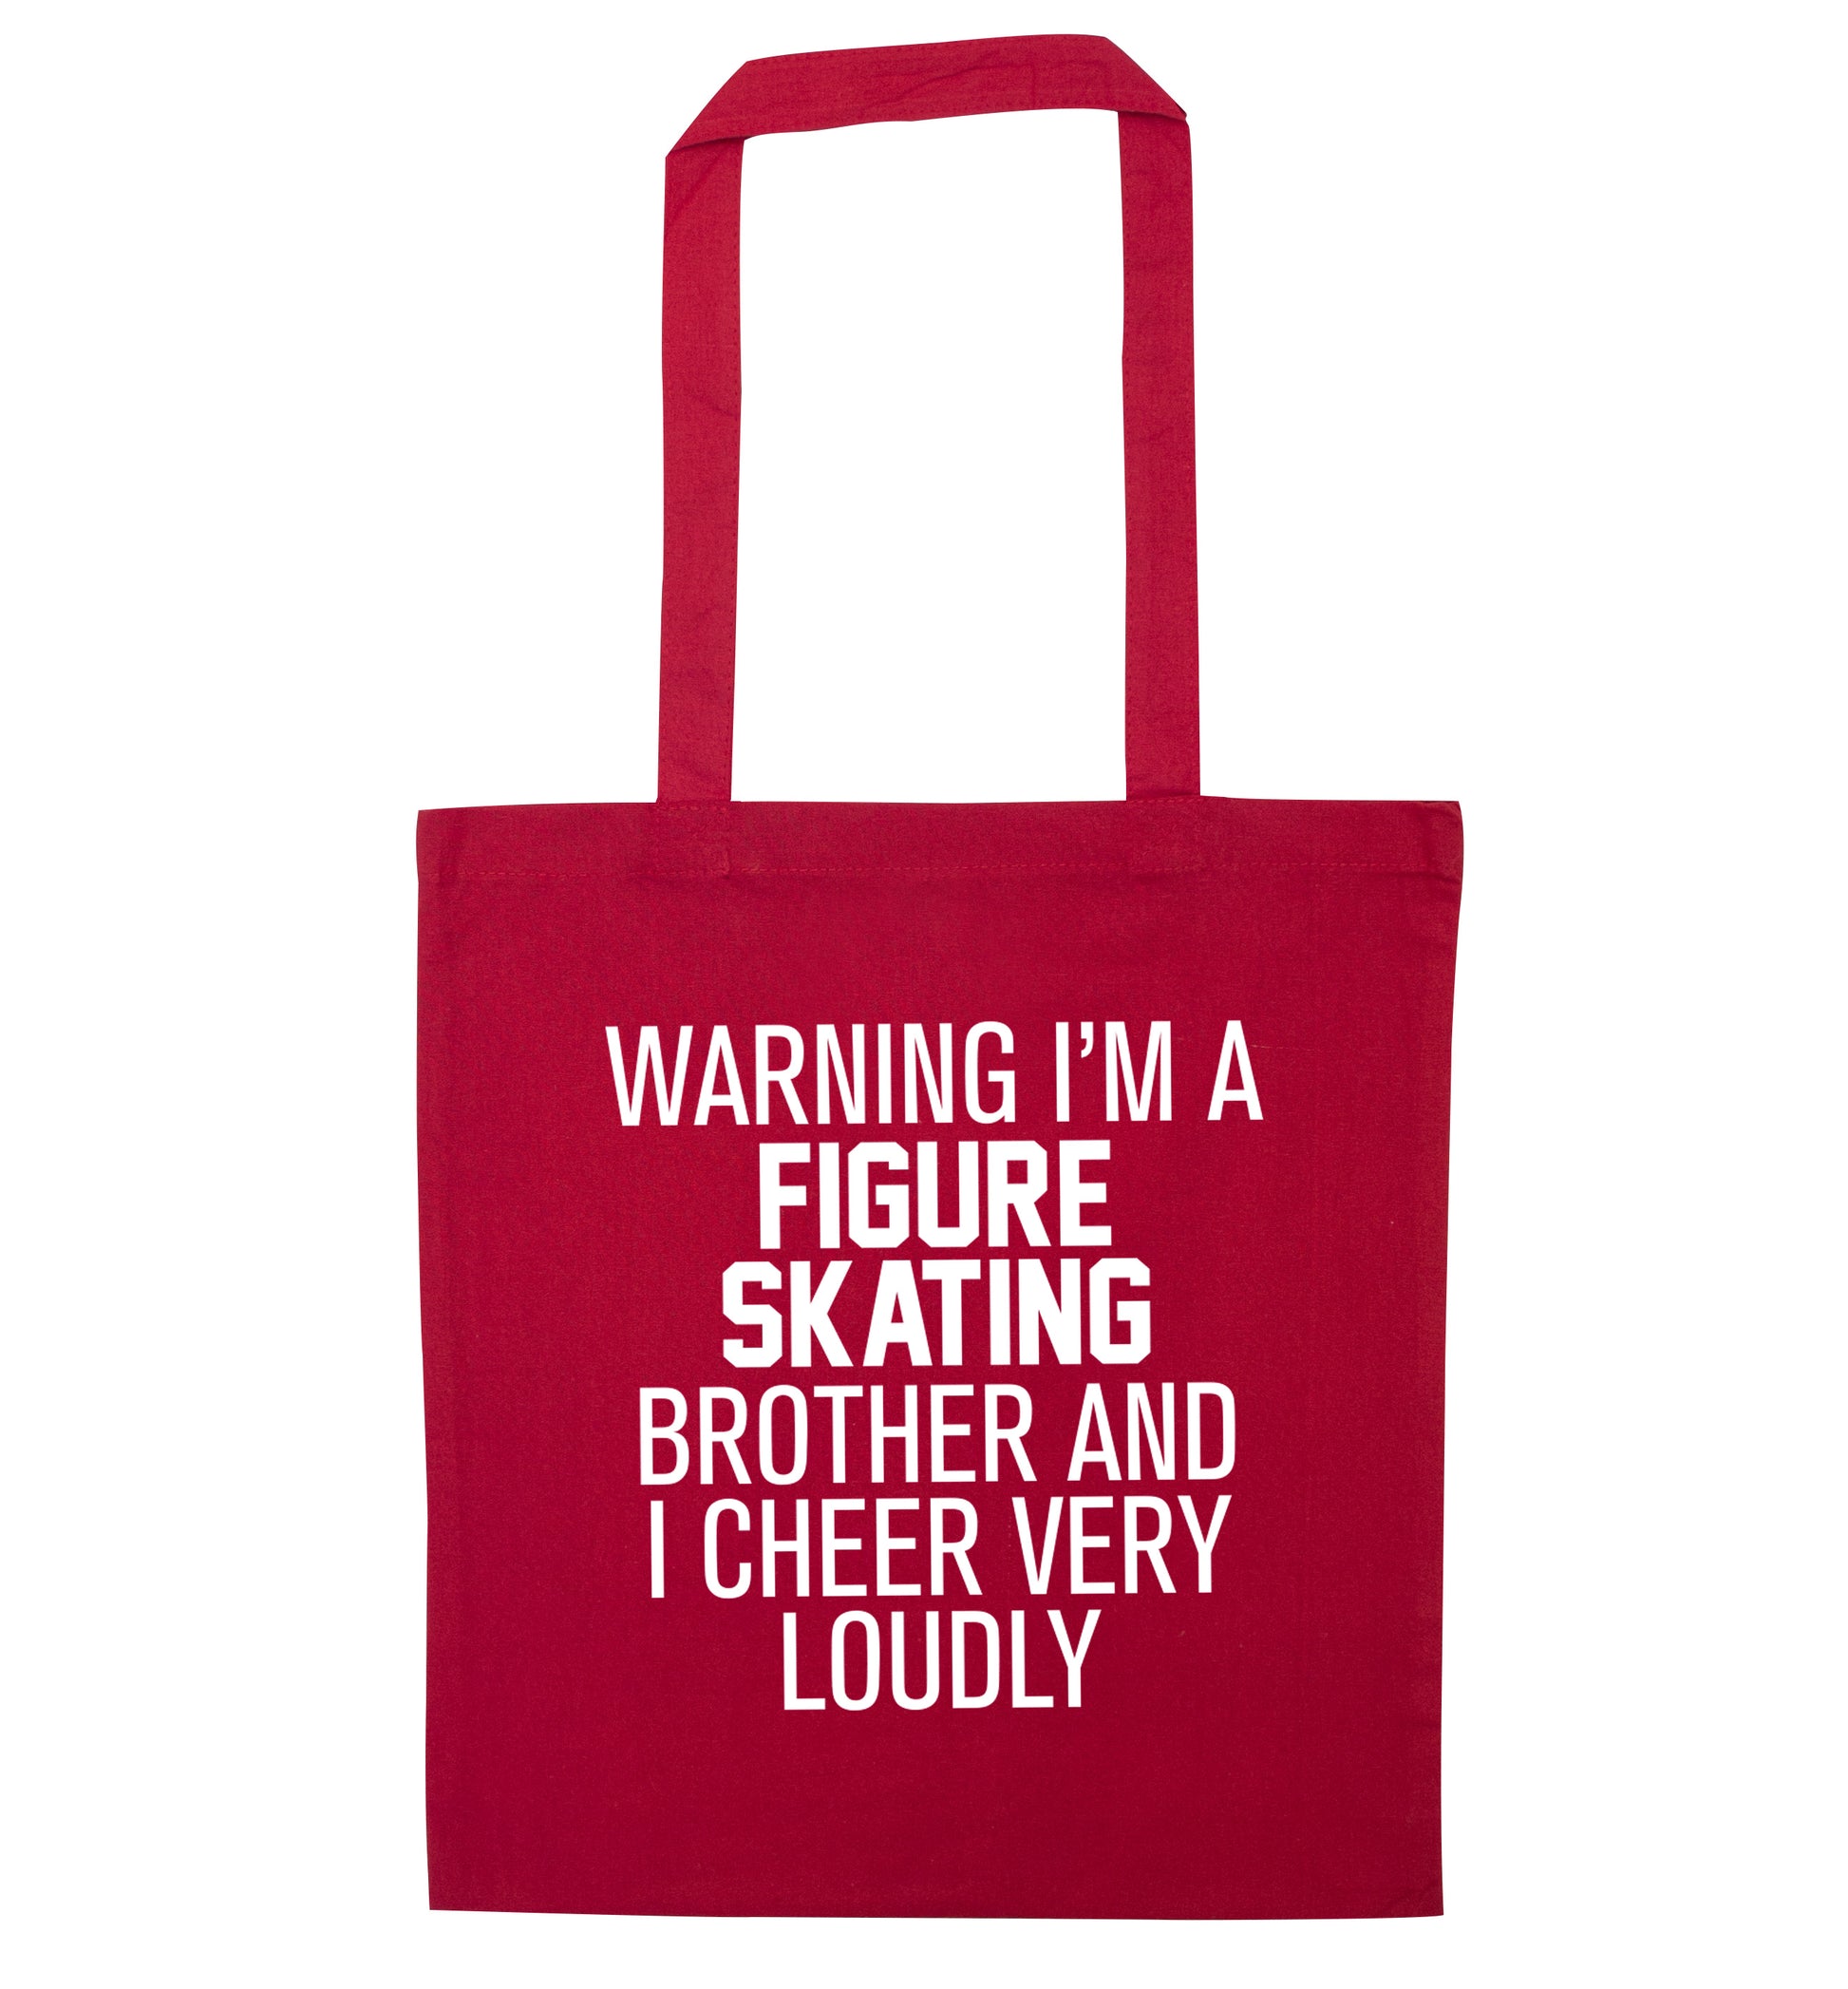 Warning I'm a figure skating brother and I cheer very loudly red tote bag